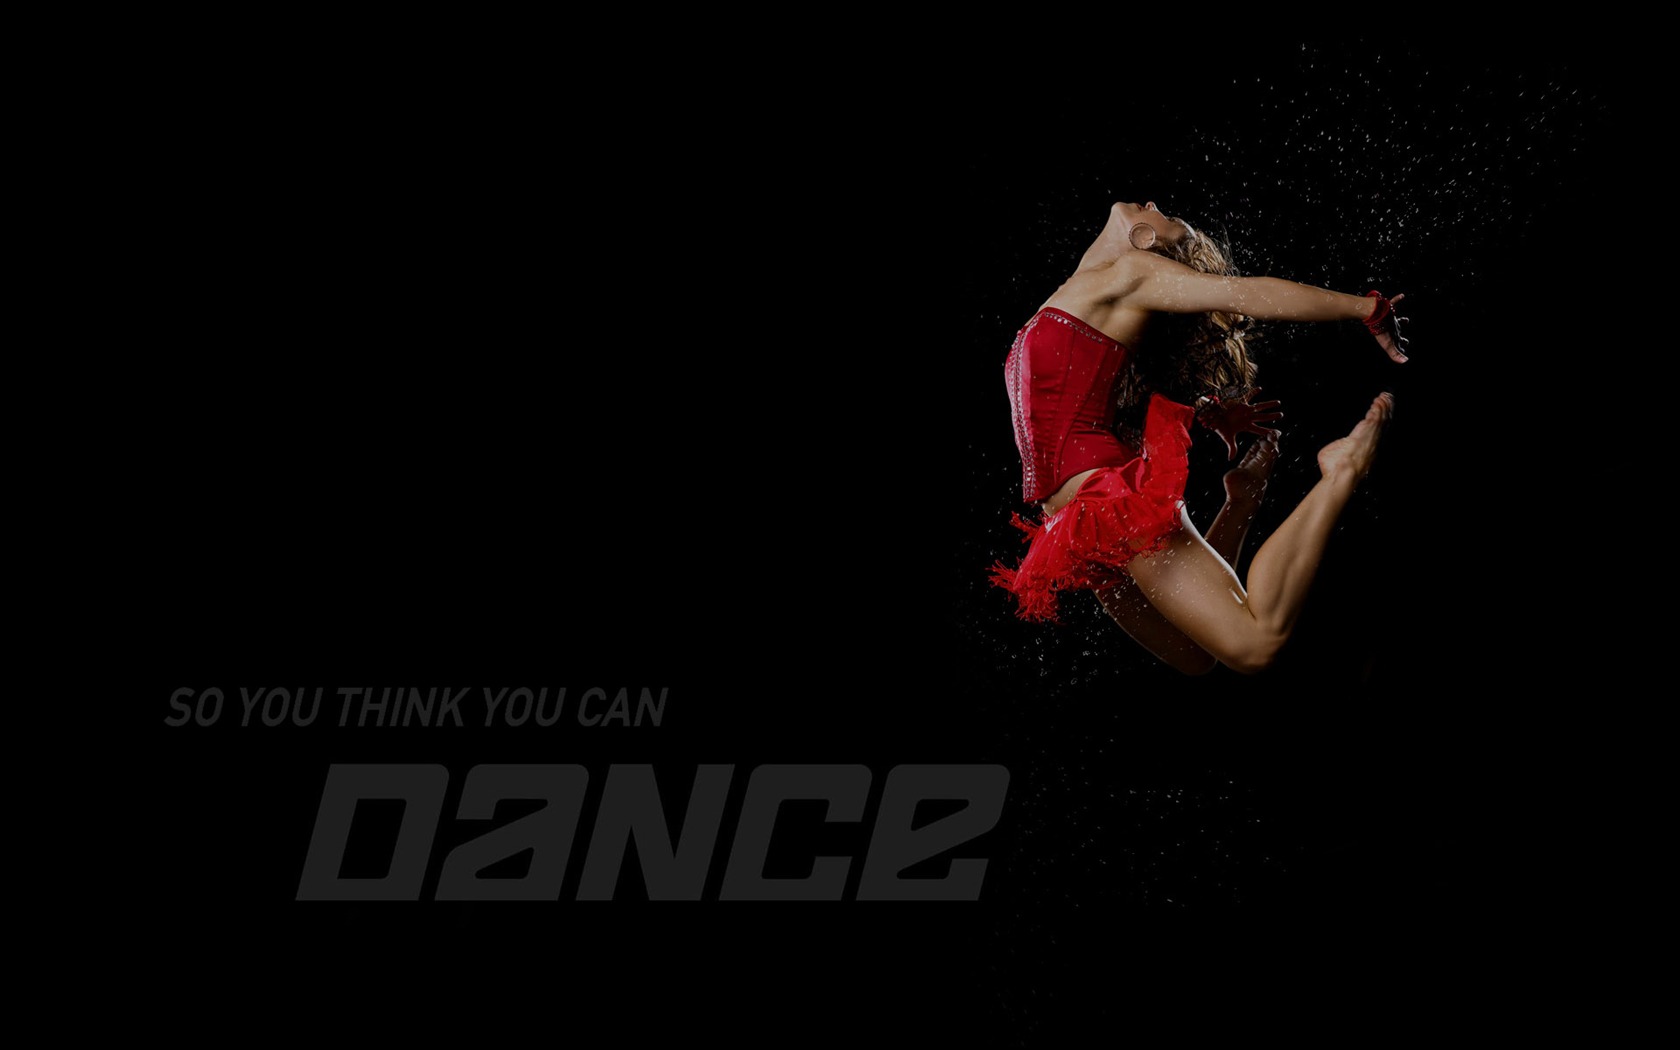 So You Think You Can Dance 舞林爭霸壁紙(二) #1 - 1680x1050